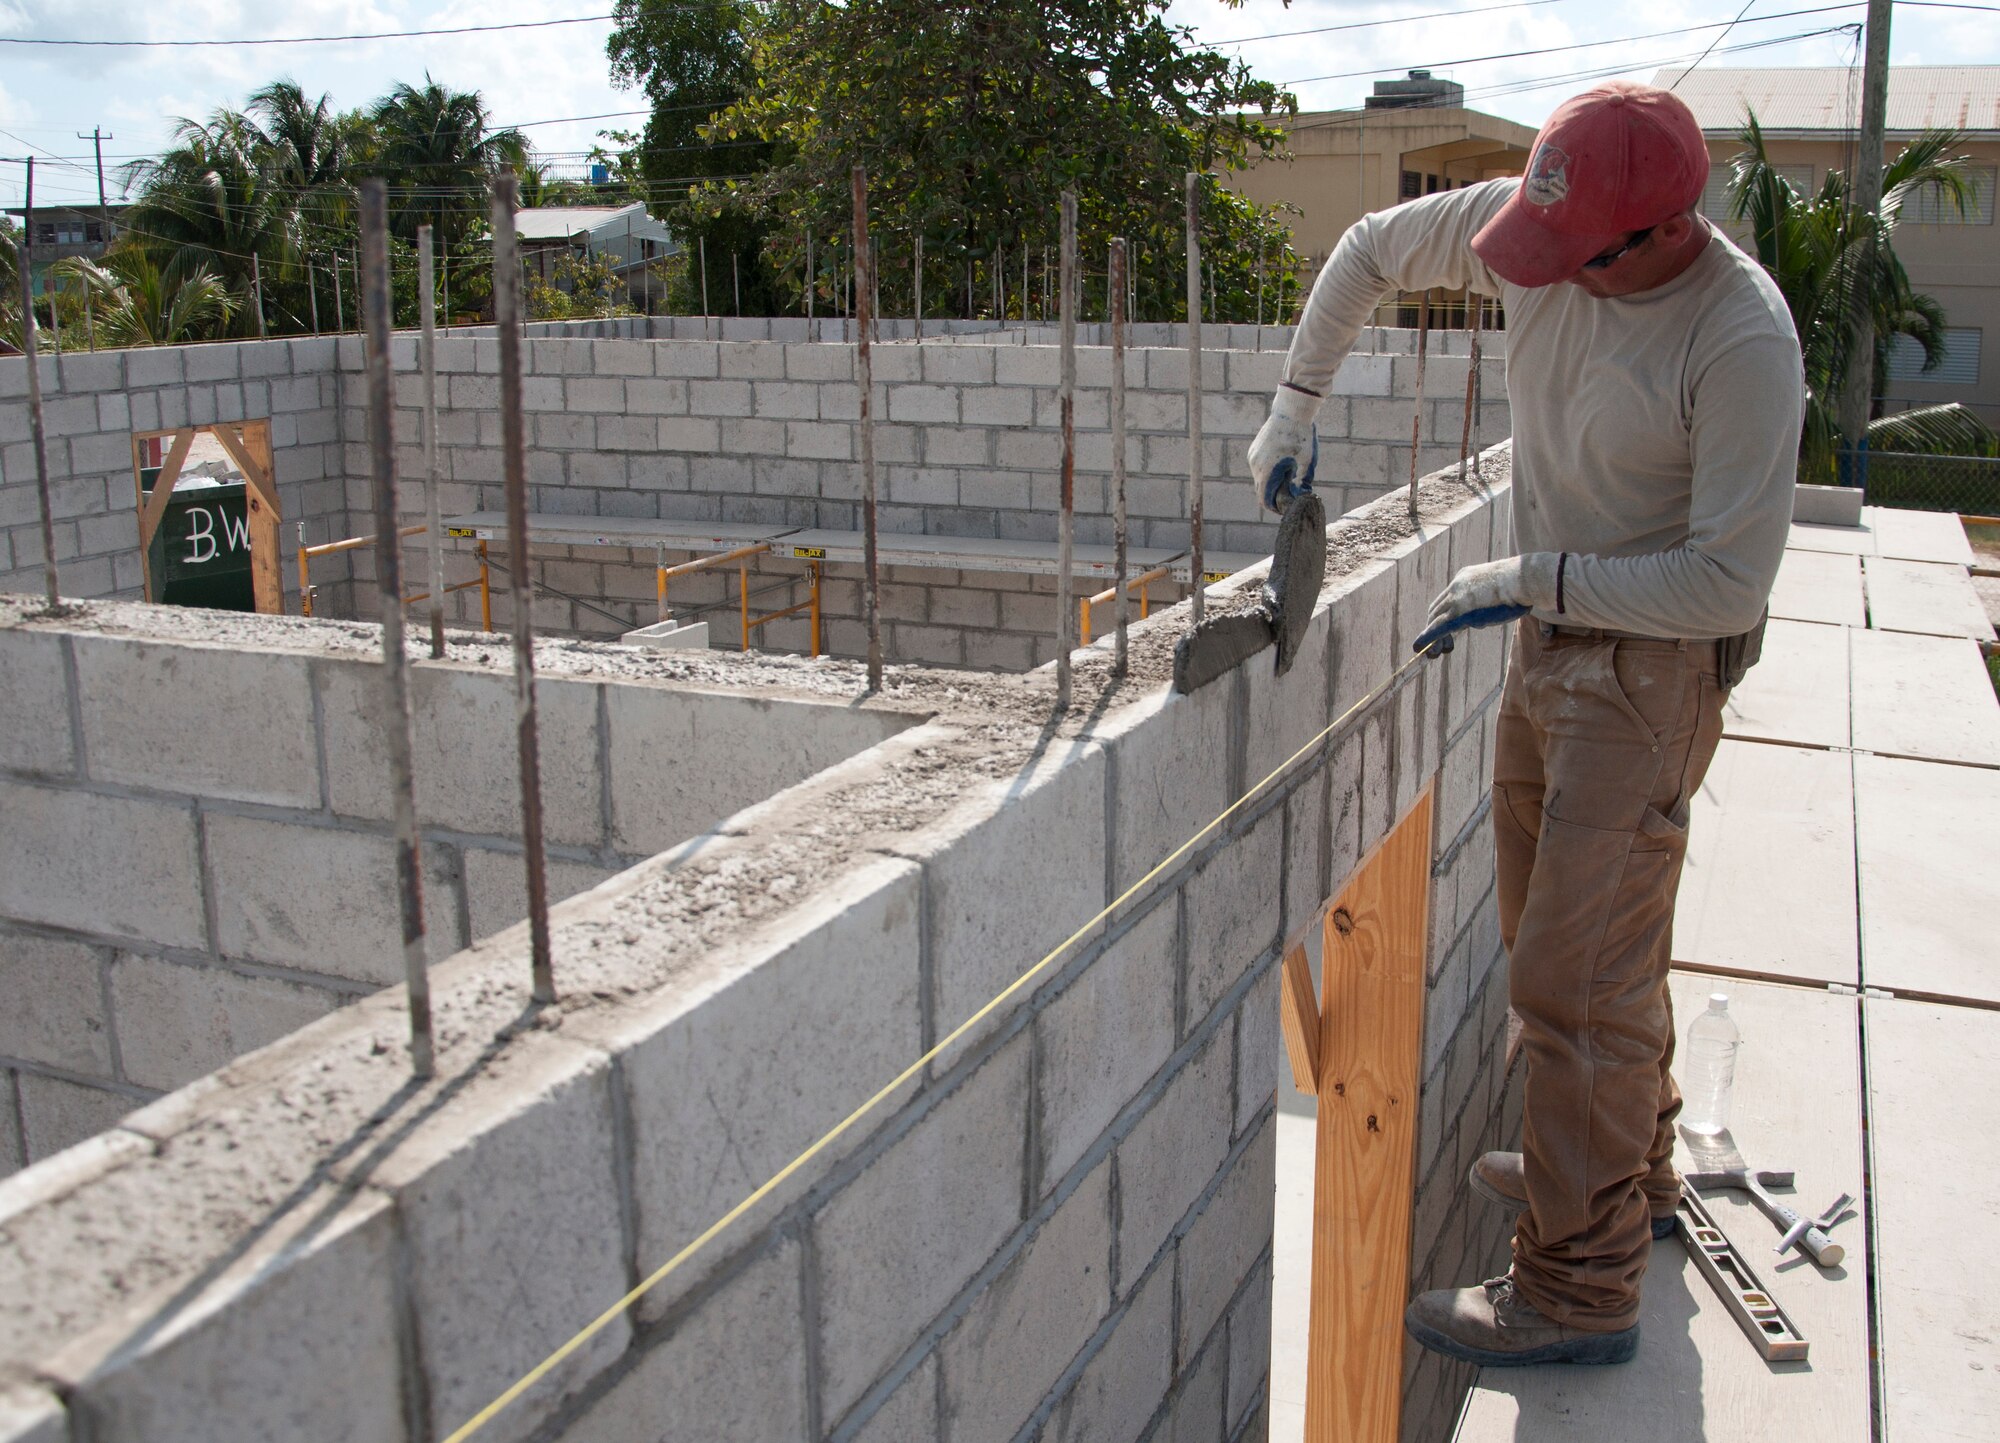 U.S. Air Force Staff Sgt. Adam Moreau, New Horizons civil engineer deployed from the 820th RED HORSE Squadron at Nellis Air Force Base, Nev., prepares mortar for laying blocks April 24, 2014, at the Sadie Vernon Technical High School construction site in Belize City, Belize. Belize Defence Force and U.S. service members are working together to build five school buildings and one medical facility throughout Belize during New Horizons Belize 2014. New Horizons is an annual event coordinated between the U.S. and the host nation to provide mutual training opportunities. (U.S. Air Force photo by Tech. Sgt. Kali L. Gradishar/Released)